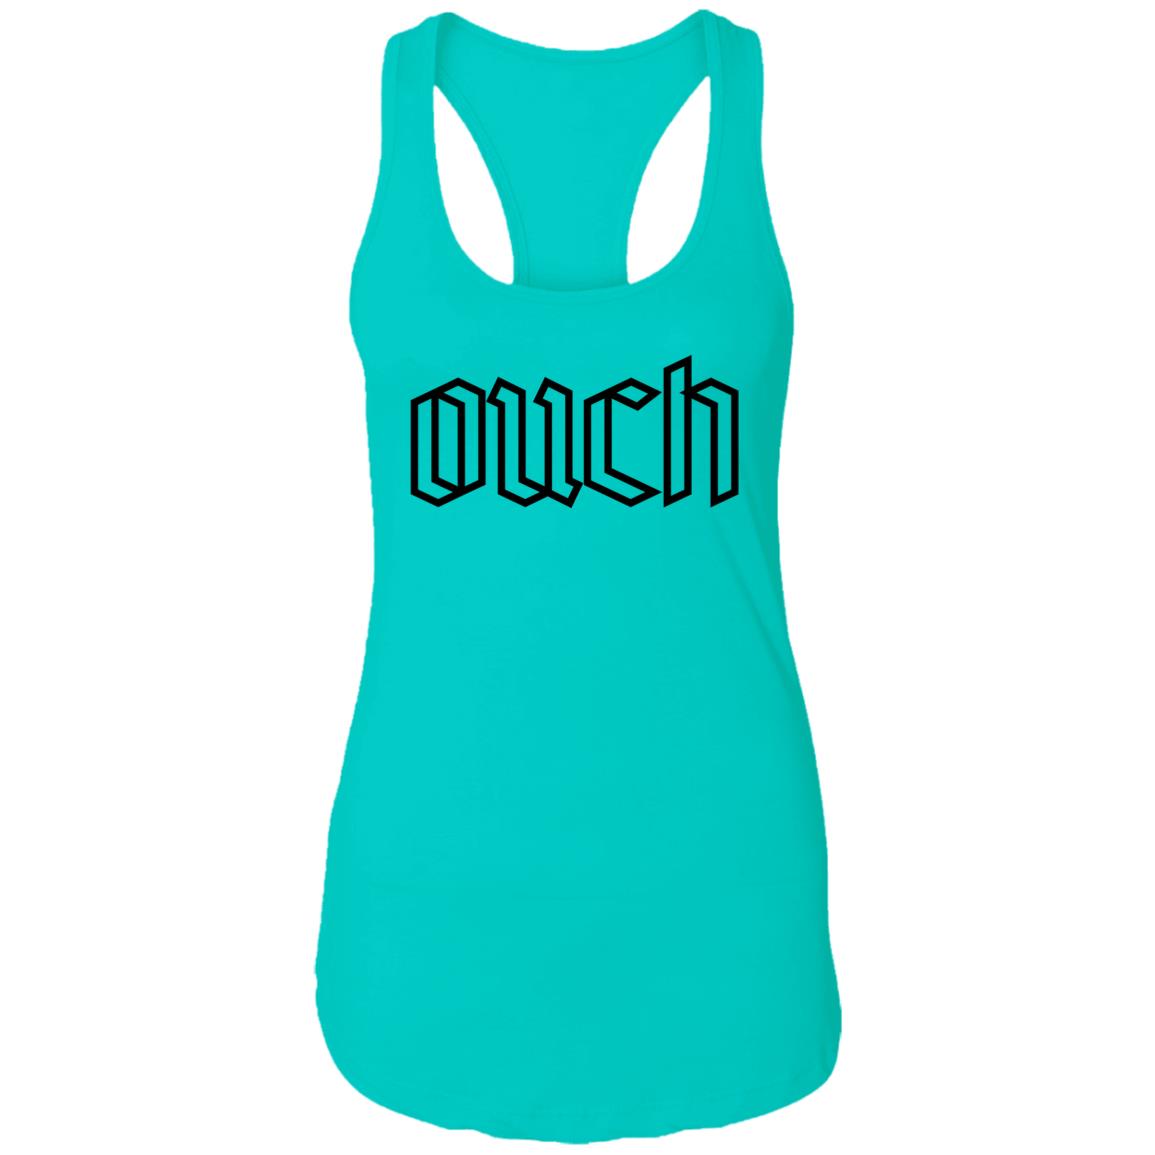 OUCH Racerback Tank